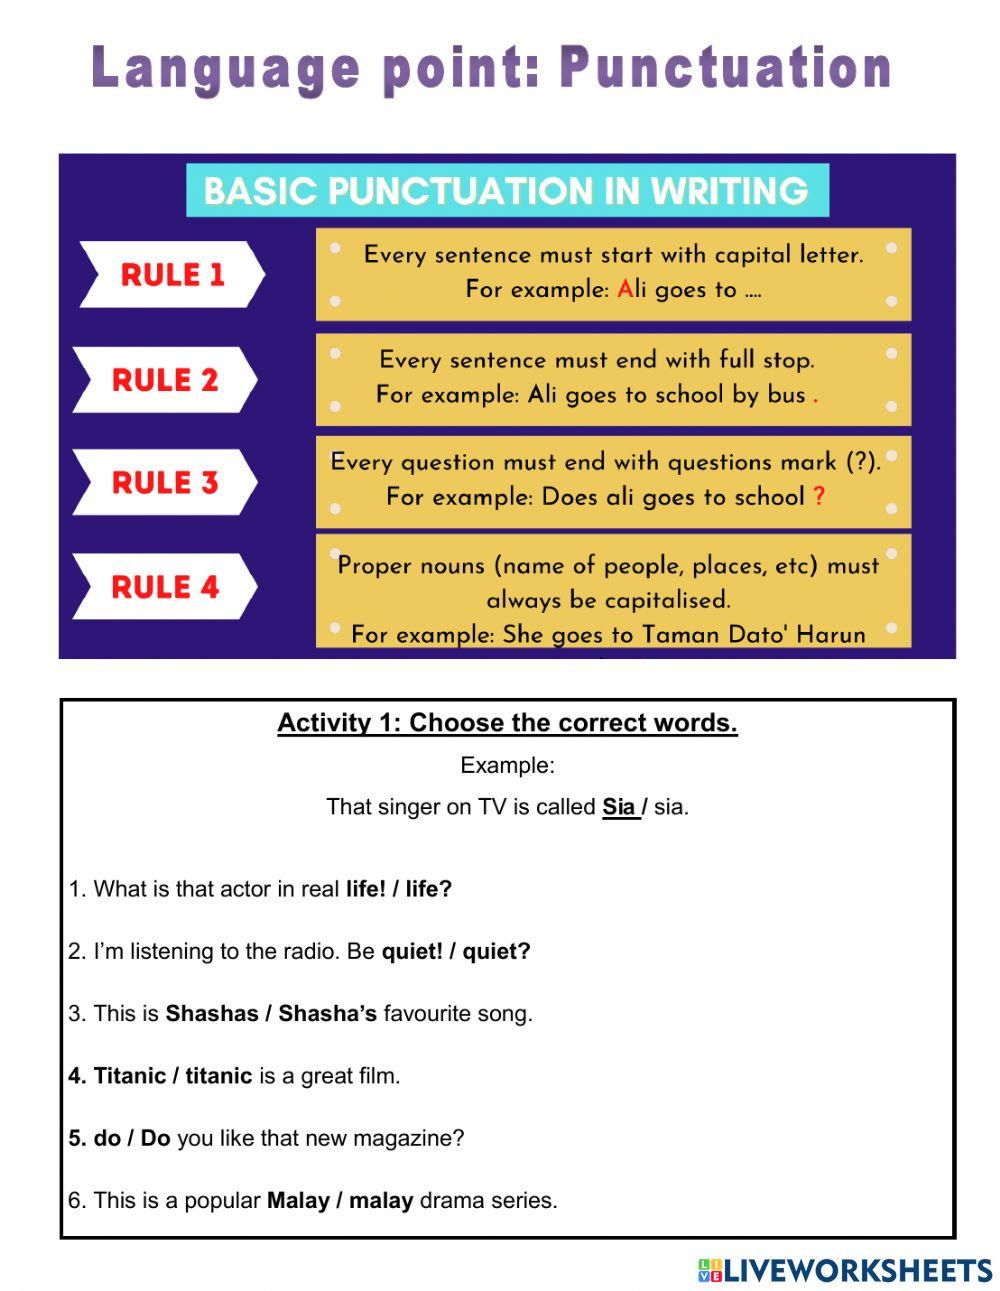 Unit 7: growing up (PUNCTUATION EXERCISE)